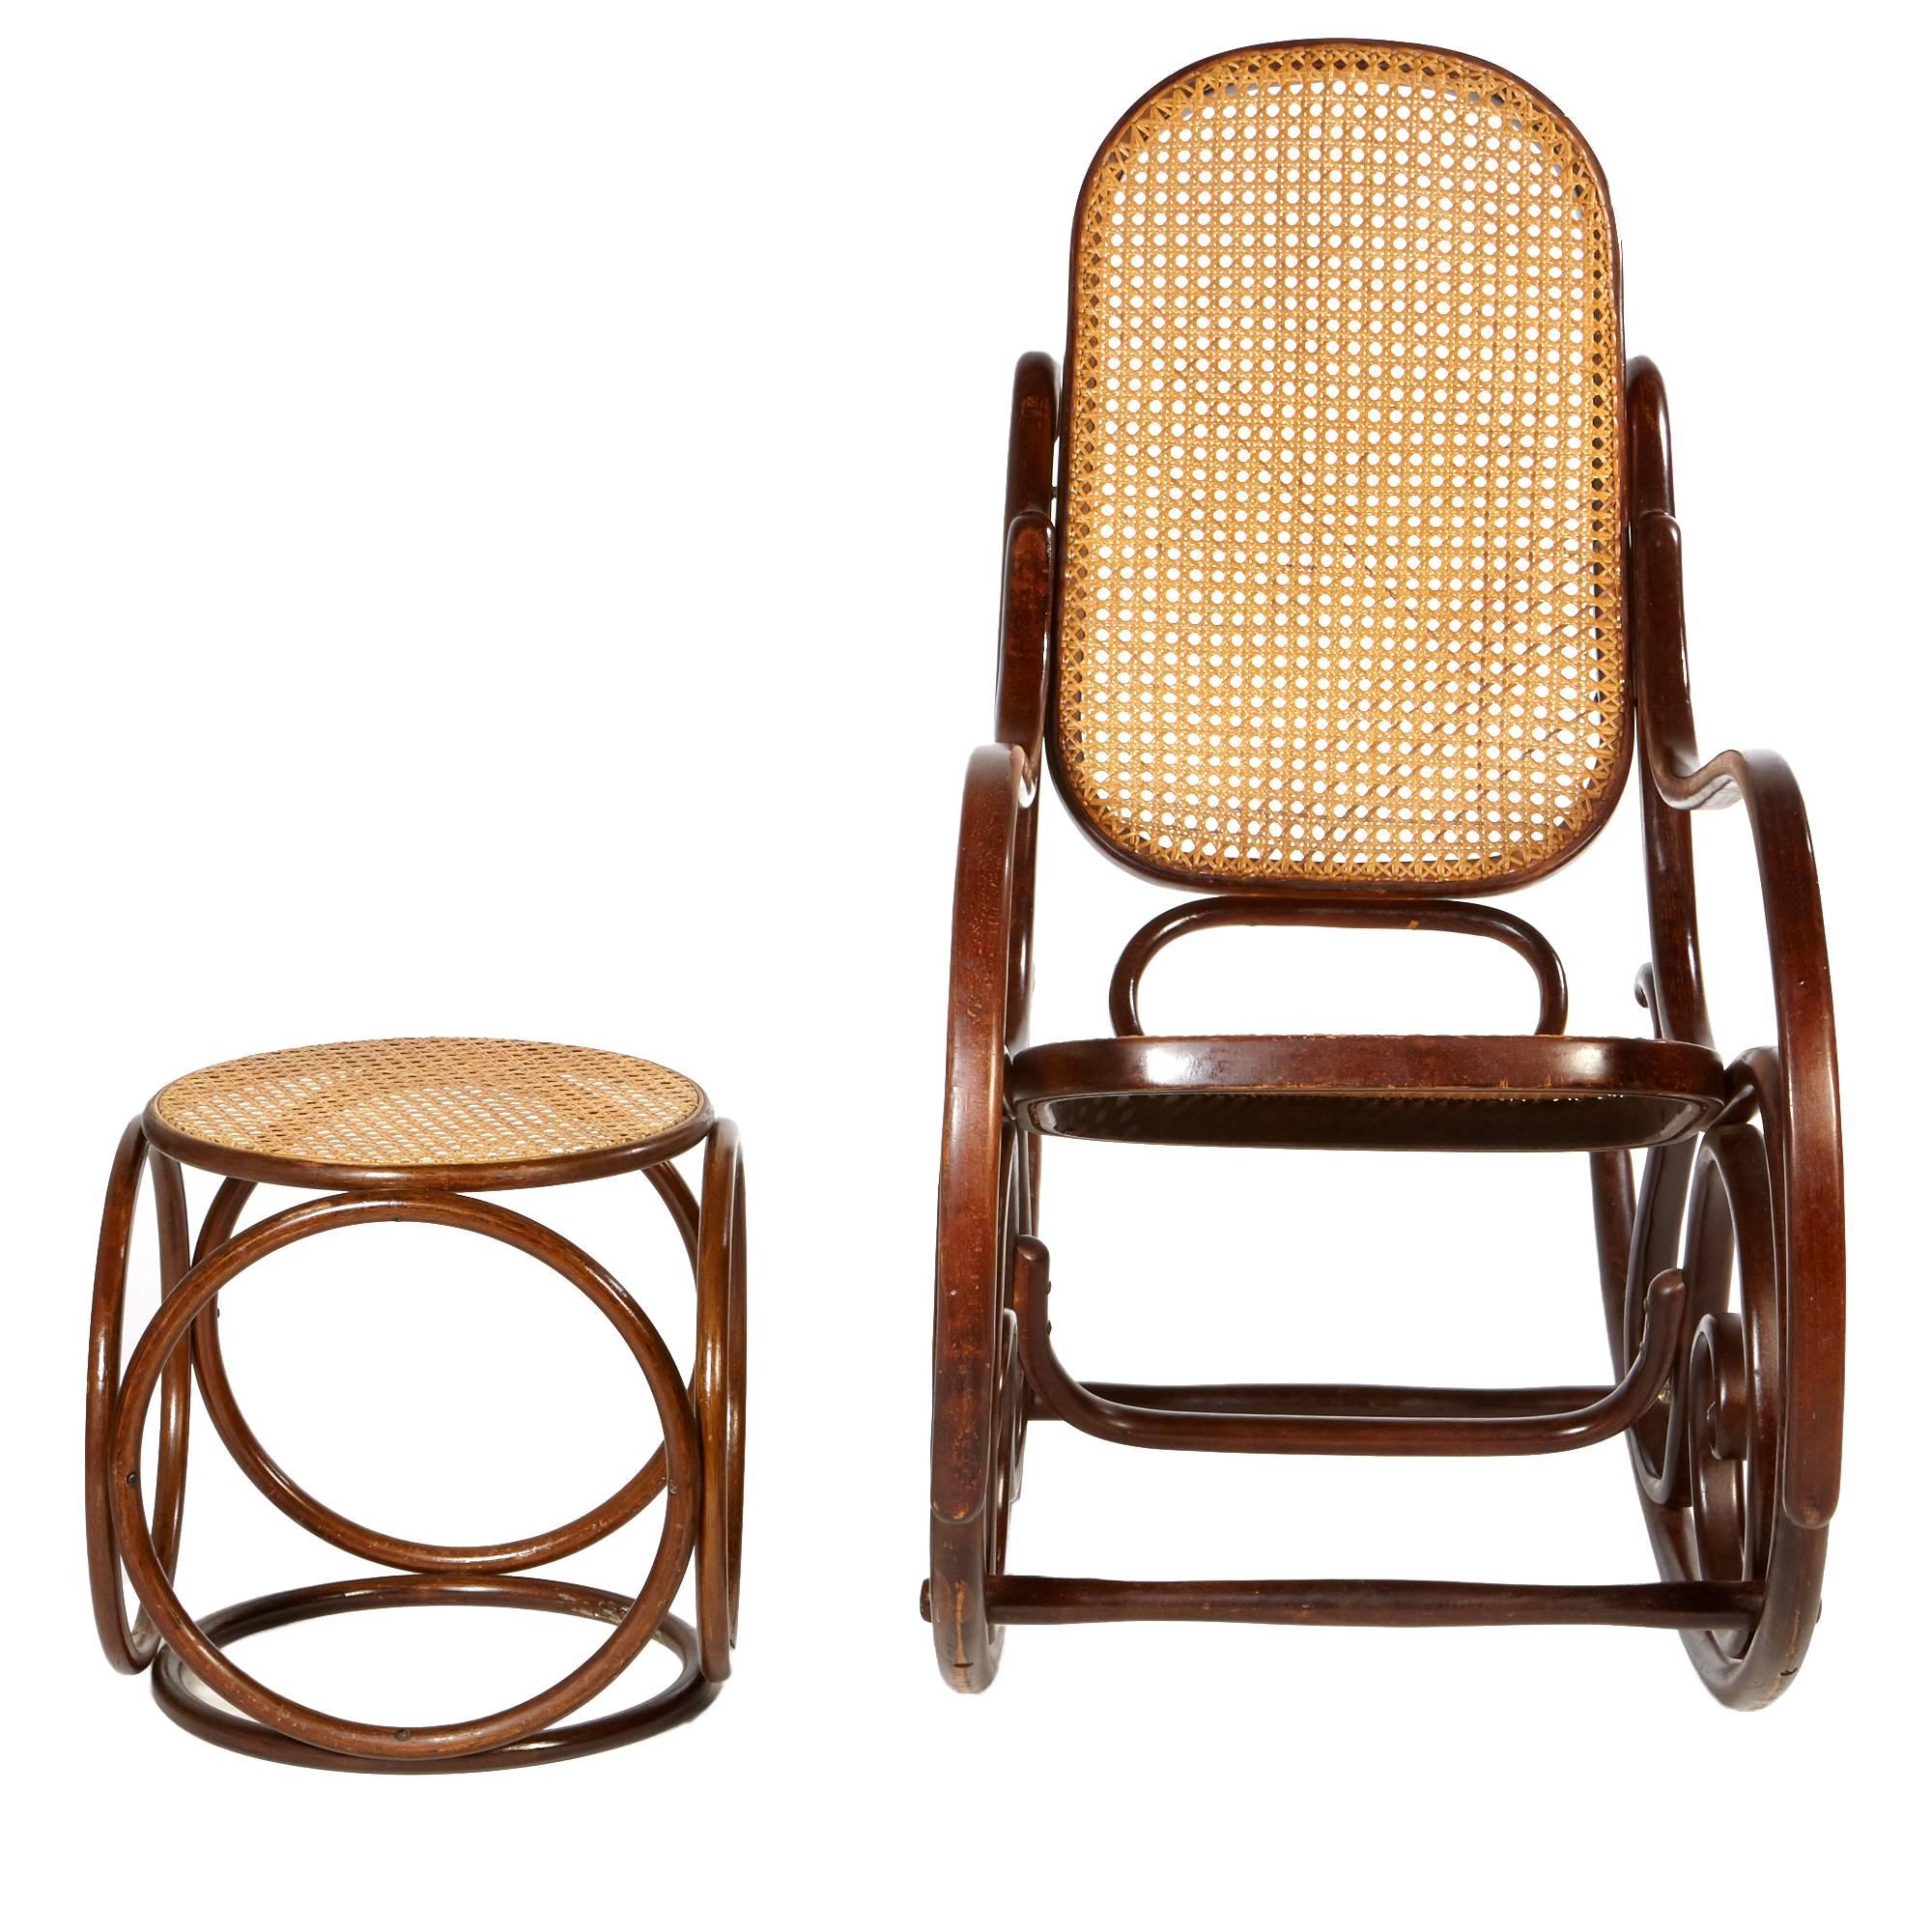 Mid-20th century Michael Thonet style caned rocking chair and matching ottoman with a dark mahogany stain. Rocker and ottoman have caned seats and circle accents. Ottoman dimensions: 15.25" D x 15.25" H.